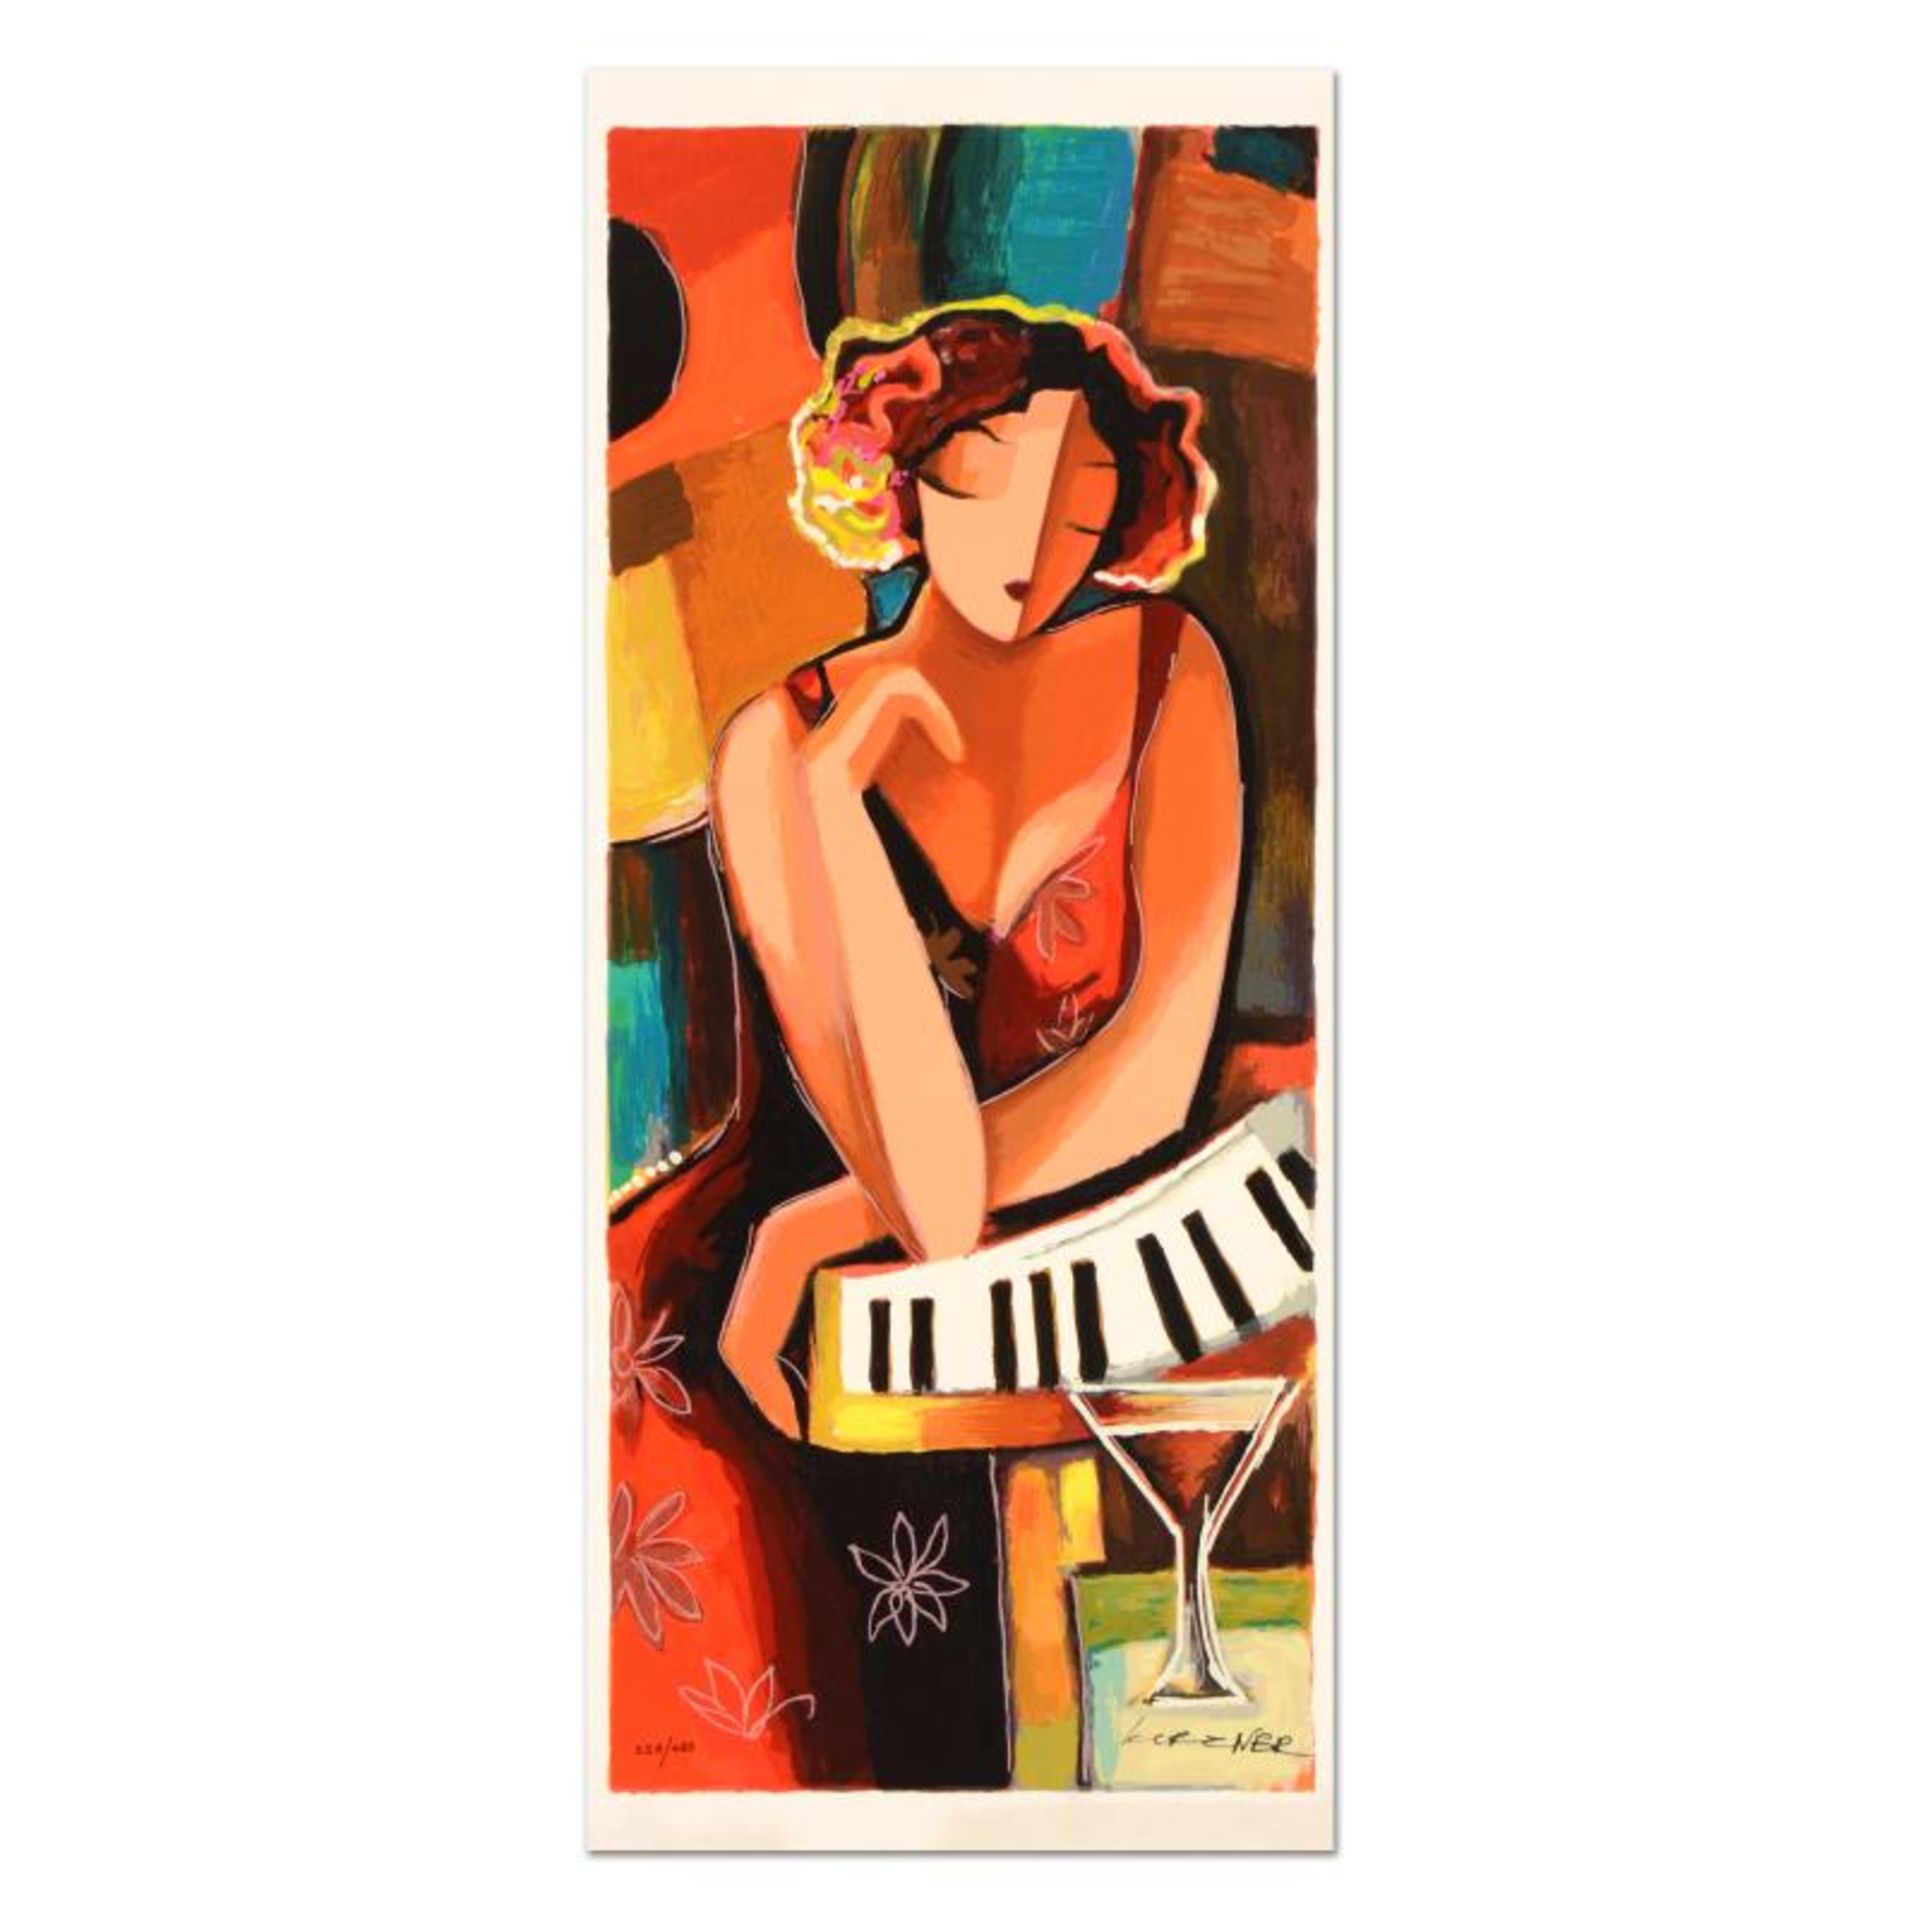 Michael Kerzner, "The Pianist" Limited Edition Serigraph, Numbered and Hand Sign